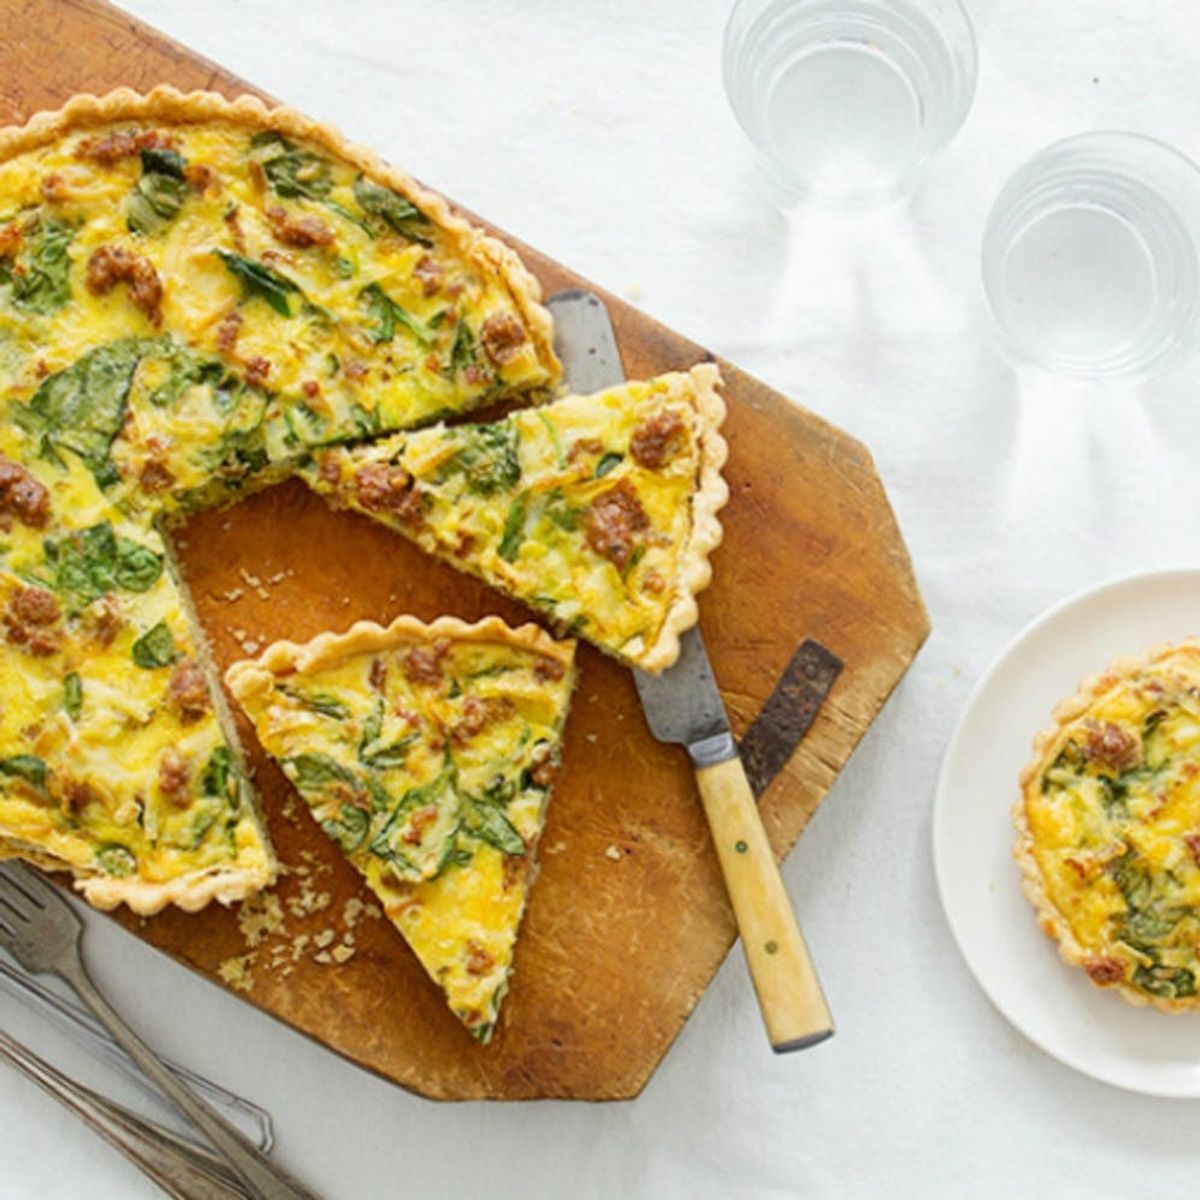 17 Make-Ahead Breakfasts for Busy Mornings